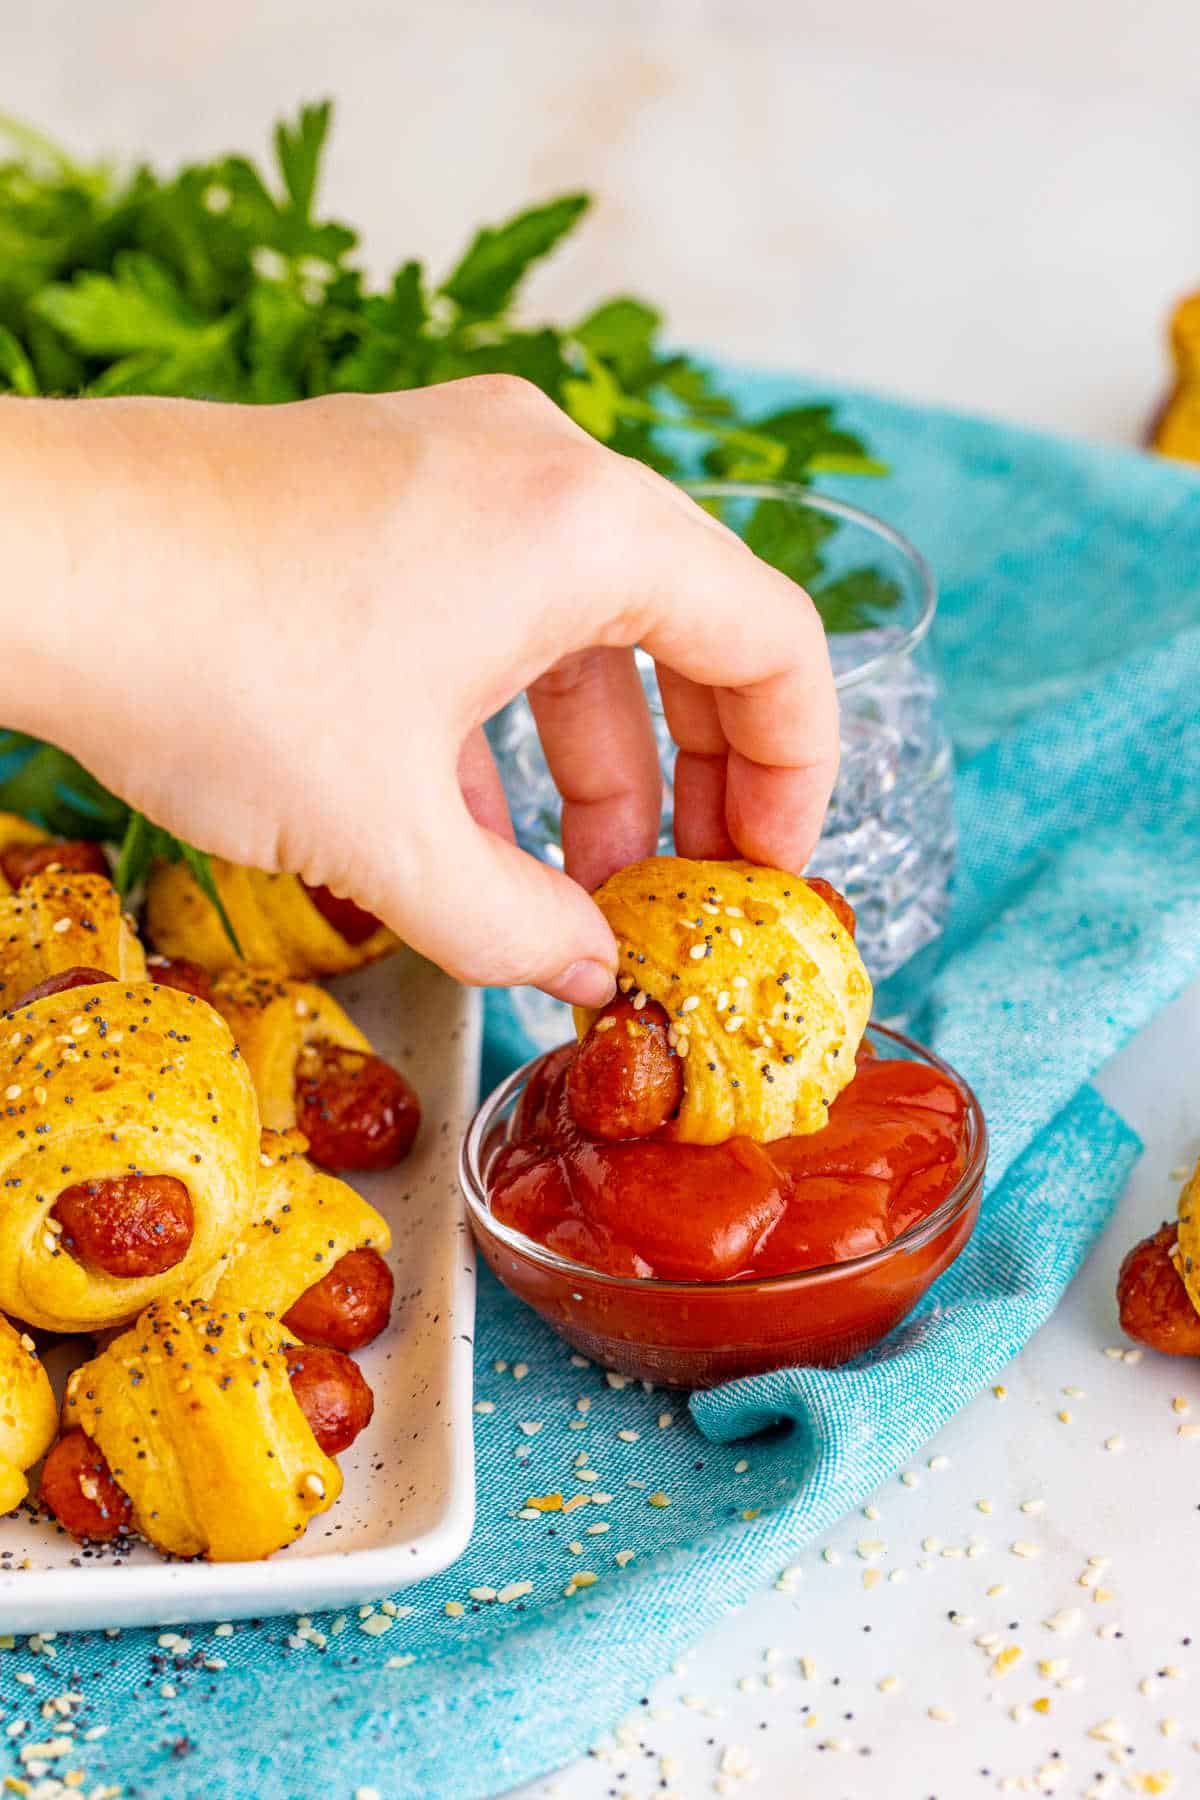 A hand dipping a pig in a blanket into ketchup.